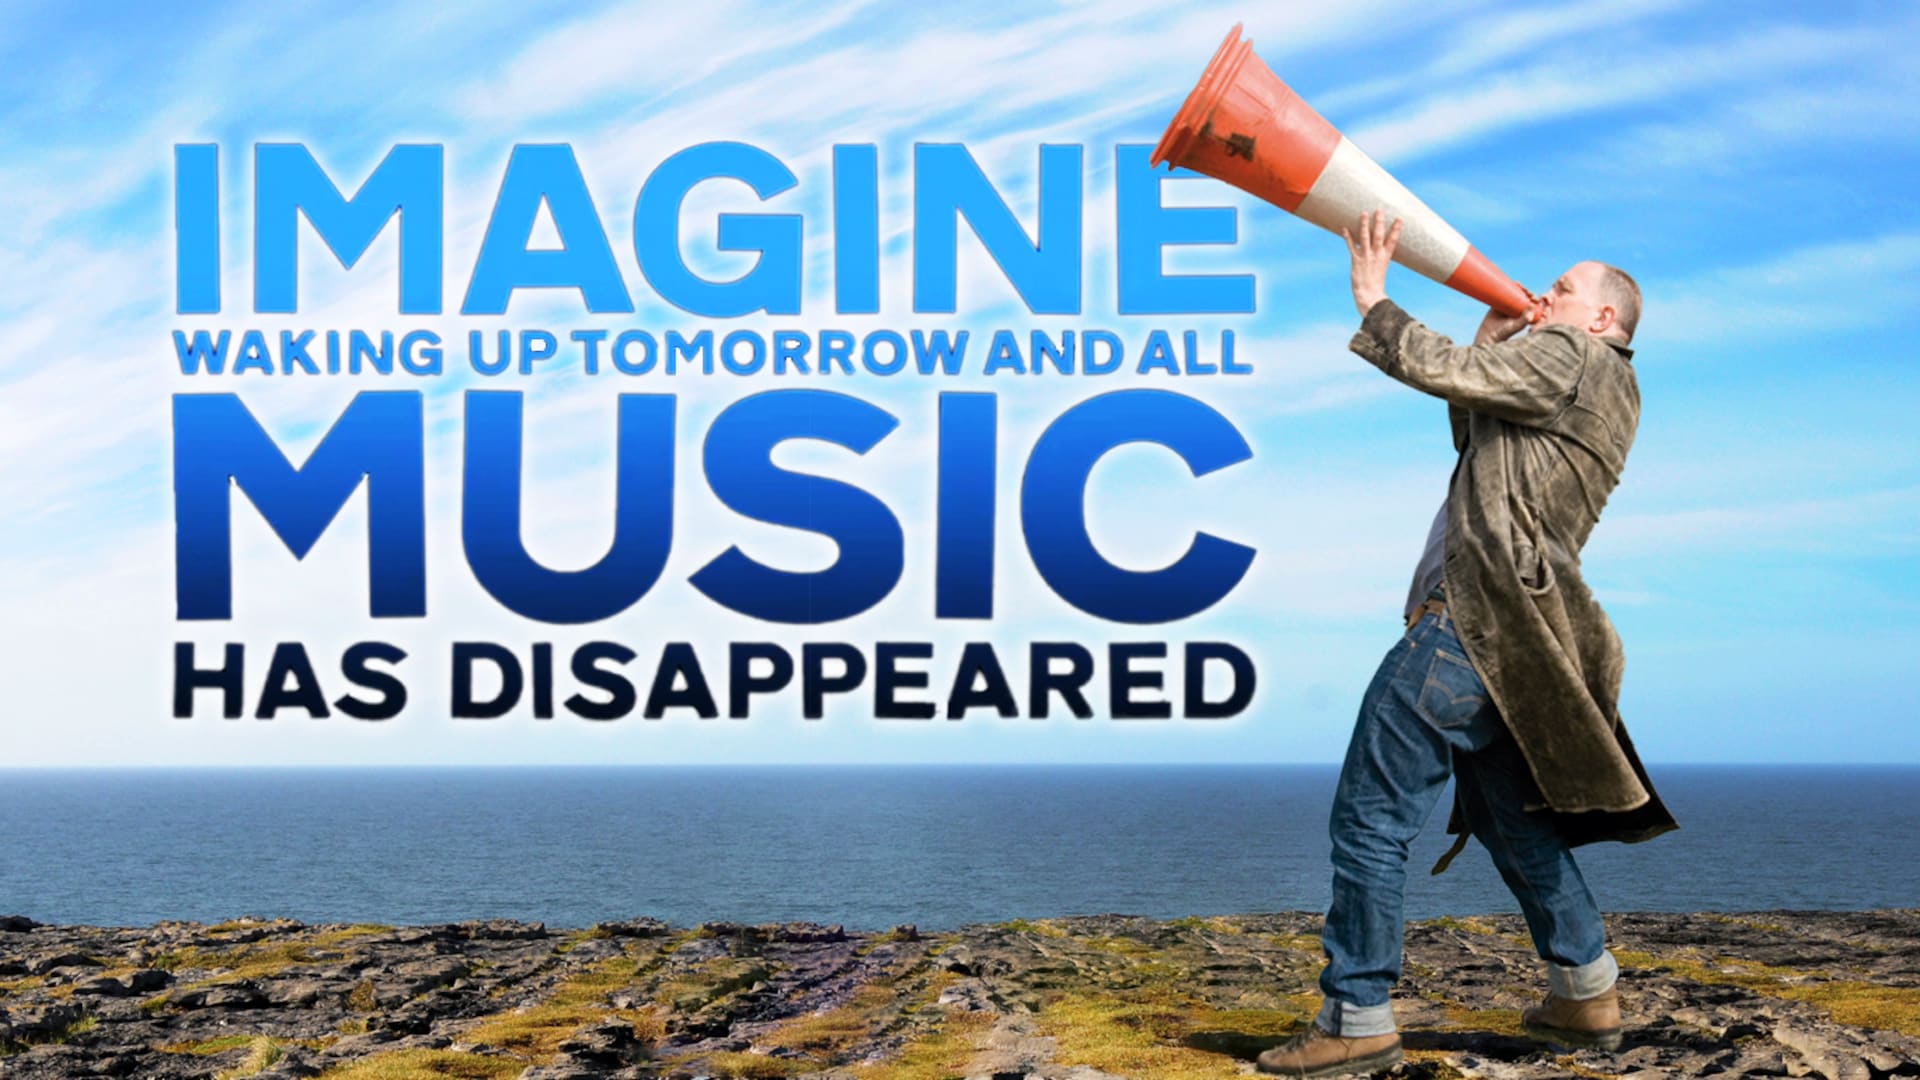 Imagine Waking Up Tomorrow And All Music Has Disappeared